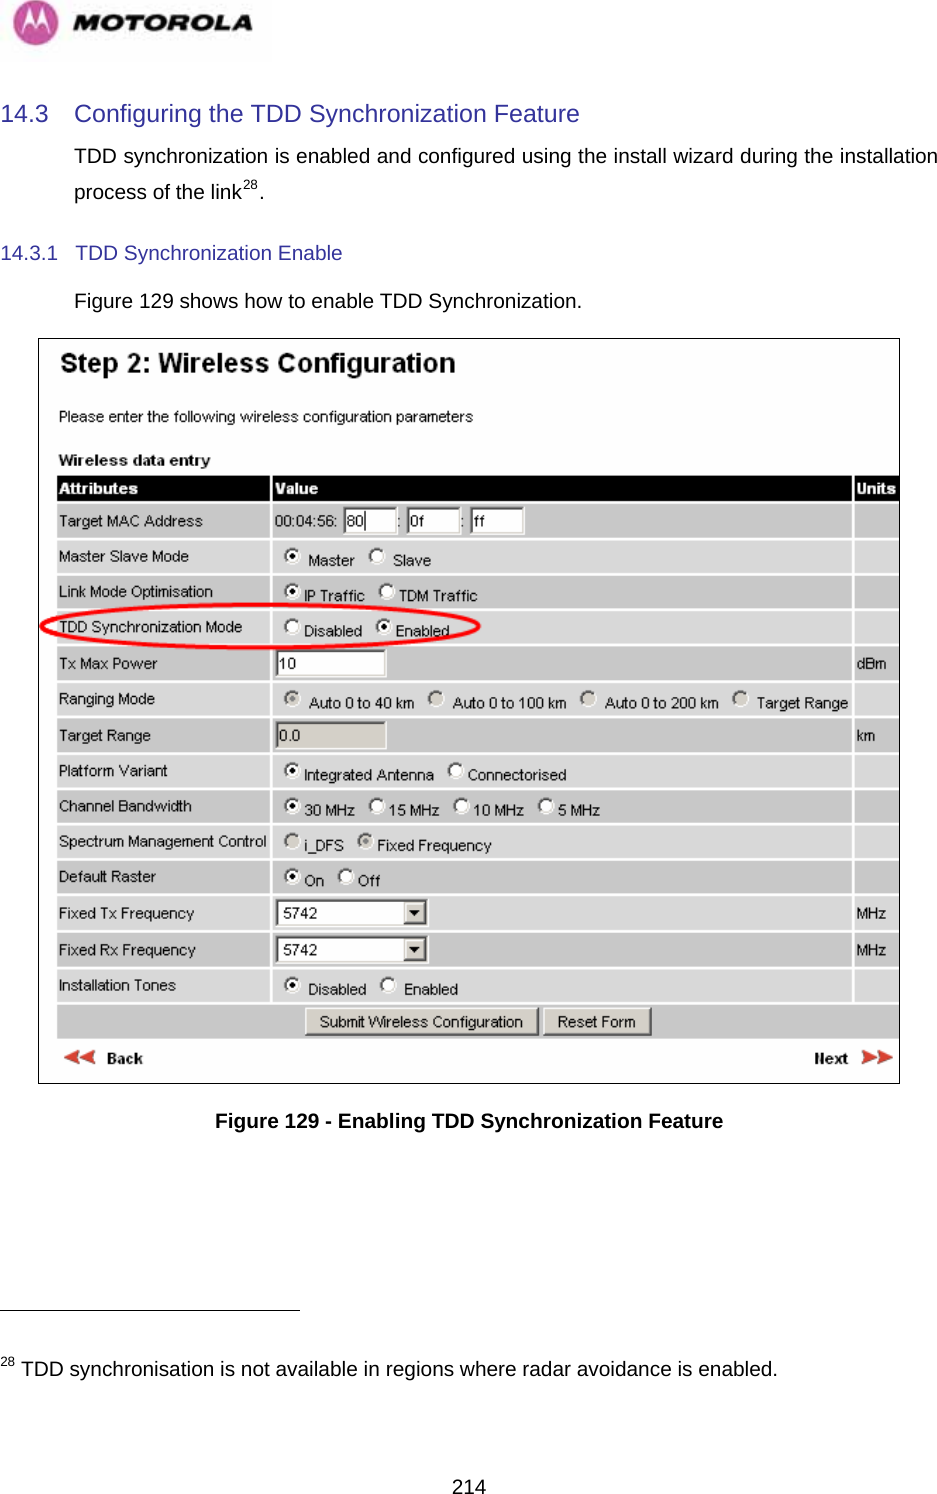   21414.3  Configuring the TDD Synchronization Feature TDD synchronization is enabled and configured using the install wizard during the installation process of the link28.  14.3.1  TDD Synchronization Enable Figure 129 shows how to enable TDD Synchronization.  Figure 129 - Enabling TDD Synchronization Feature                                                       28 TDD synchronisation is not available in regions where radar avoidance is enabled. 